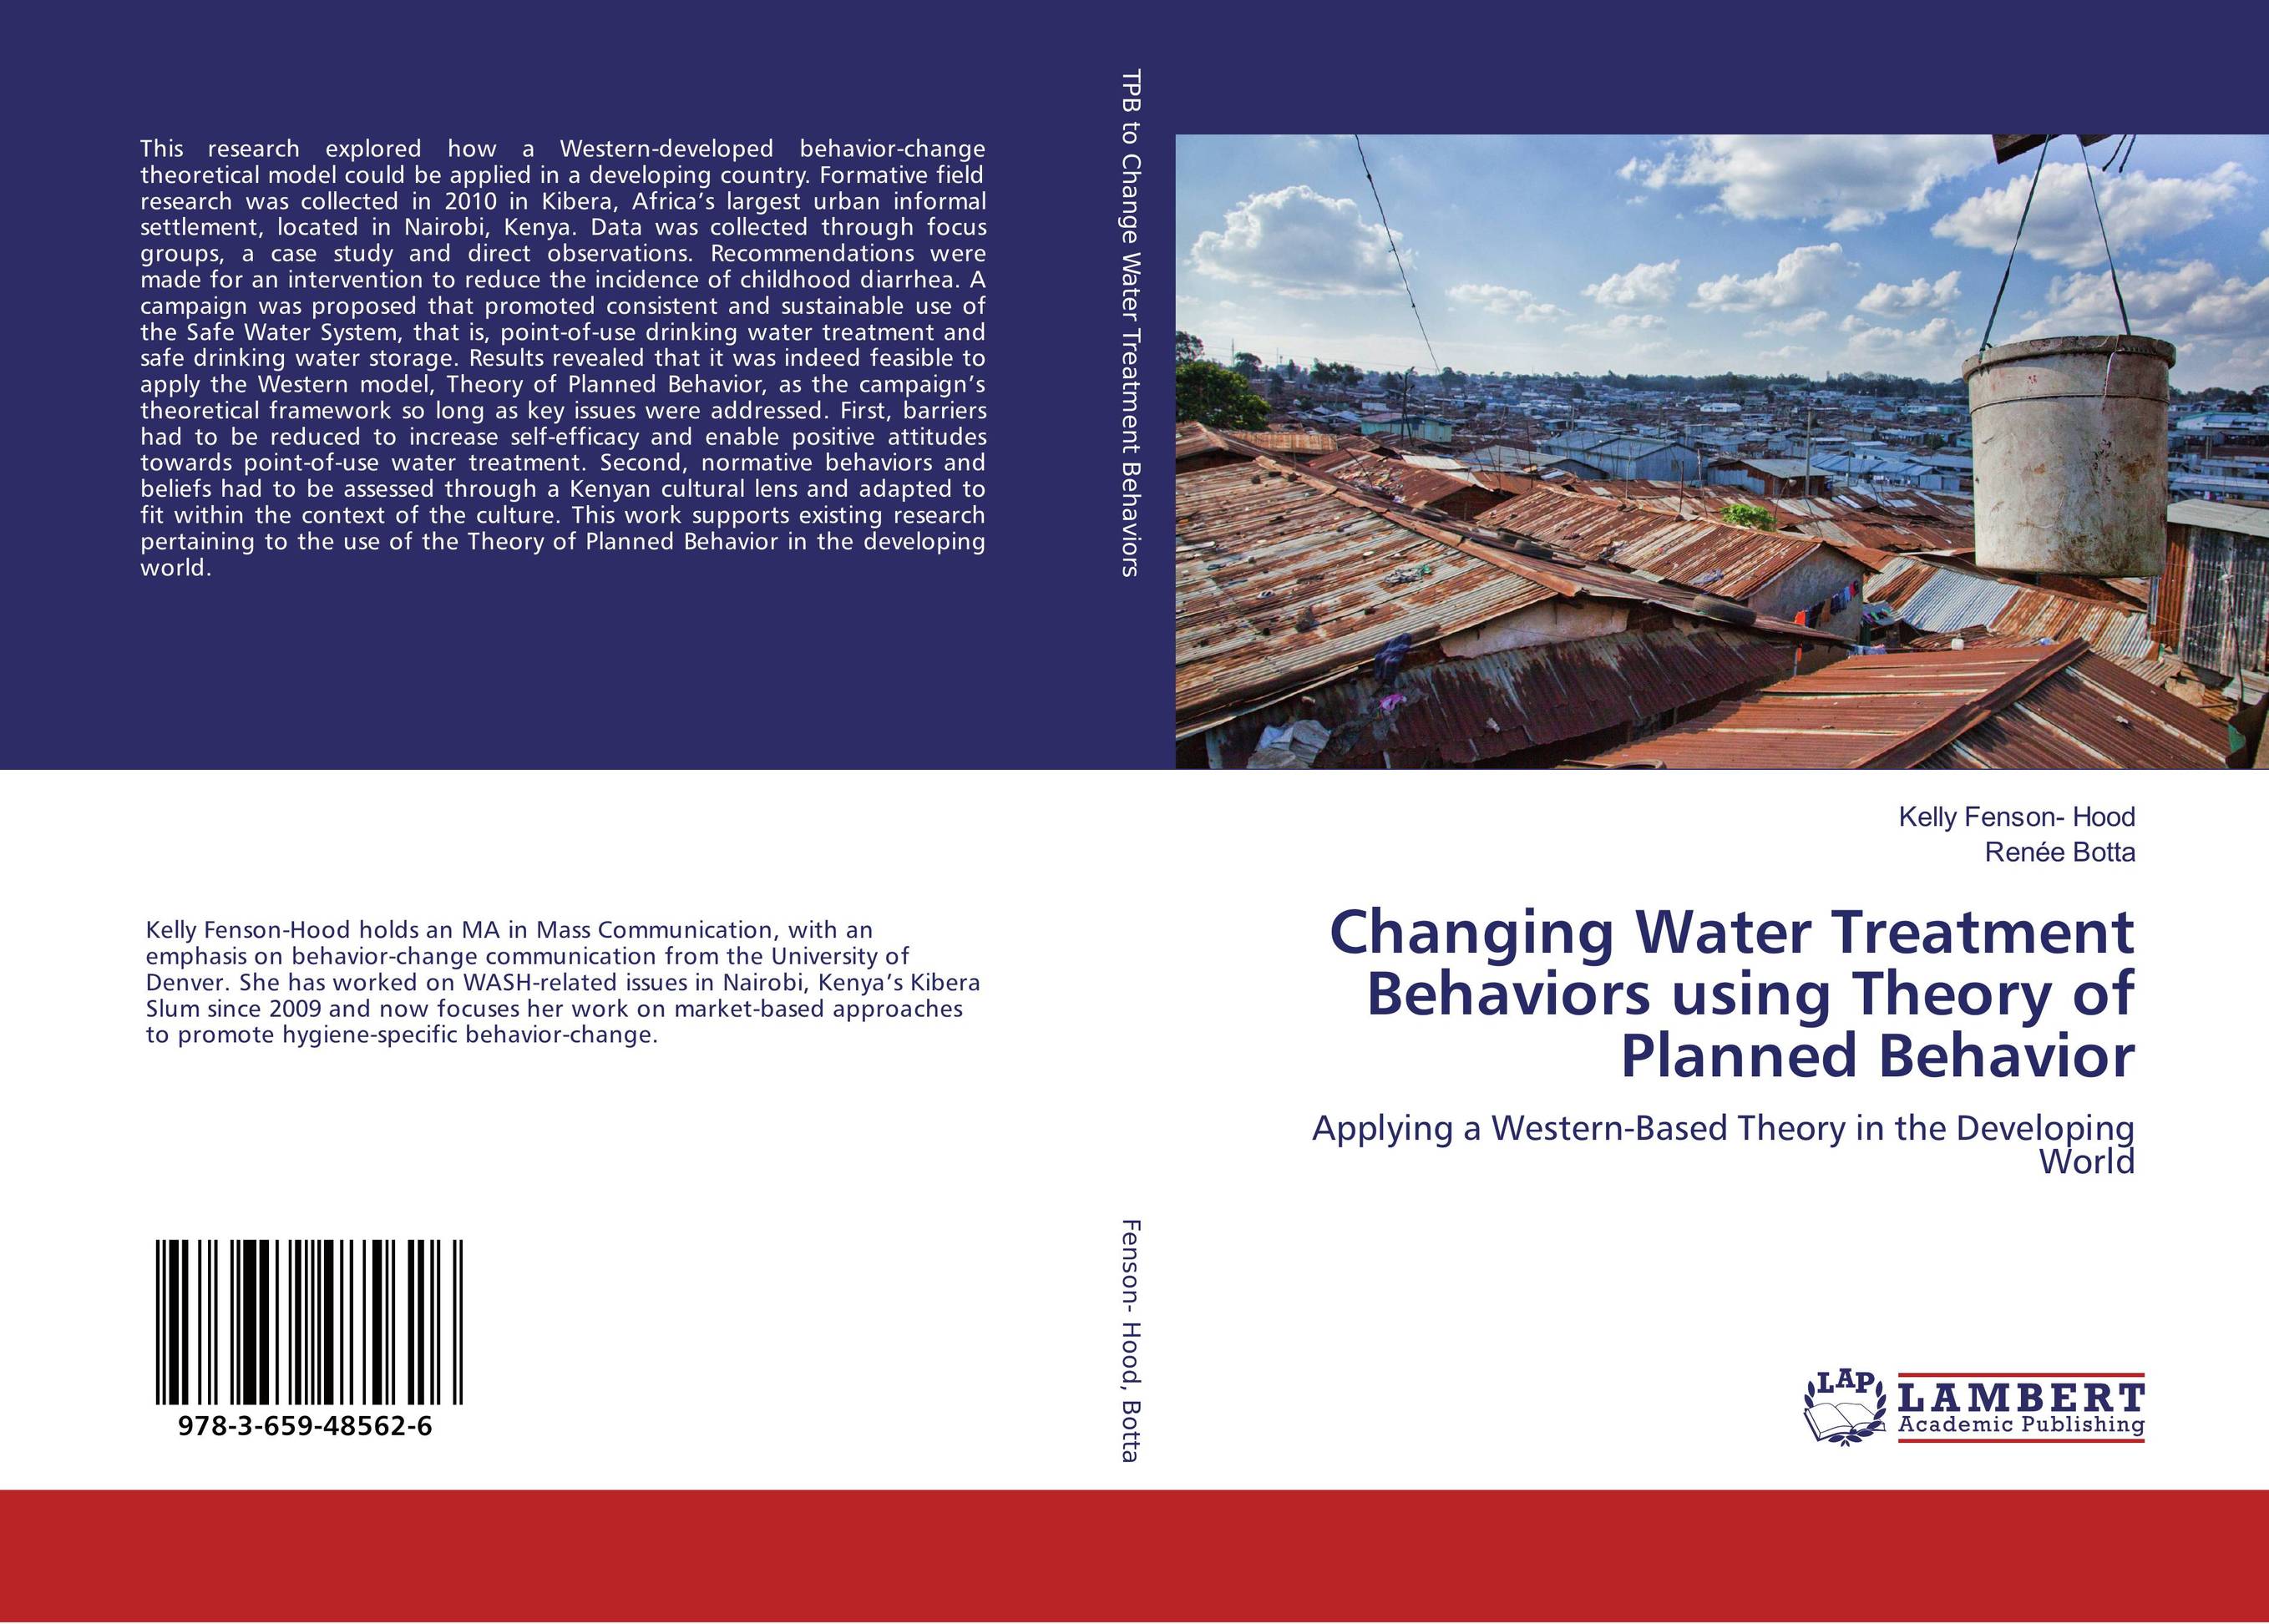 Changing Water Treatment Behaviors using Theory of Planned Behavior